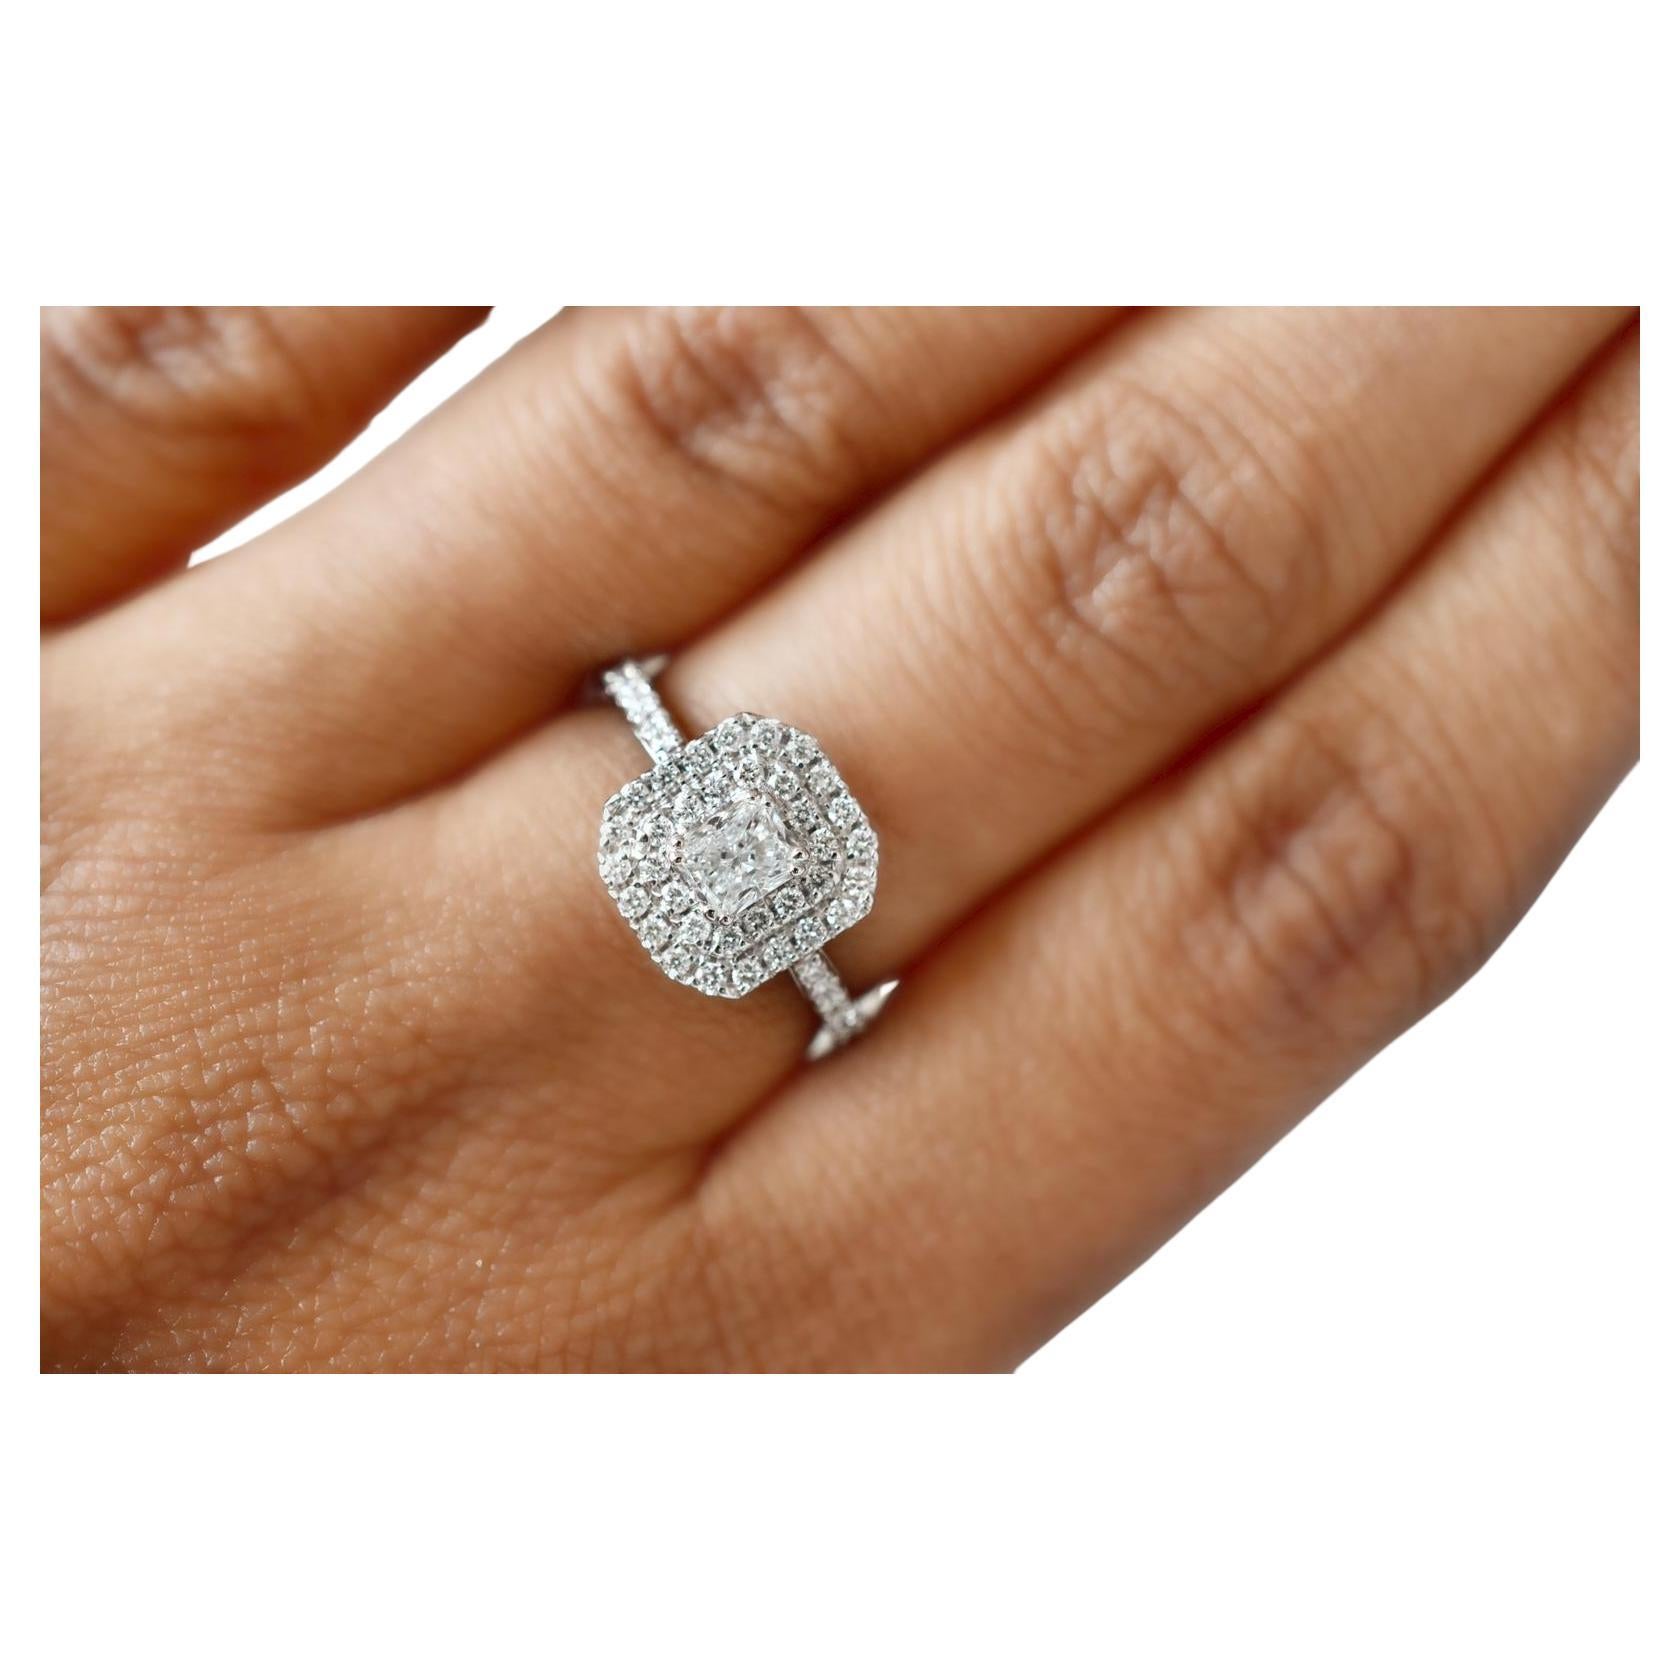 0.42 Carat White Diamond Ring VVS2 Clarity GIA Certified For Sale